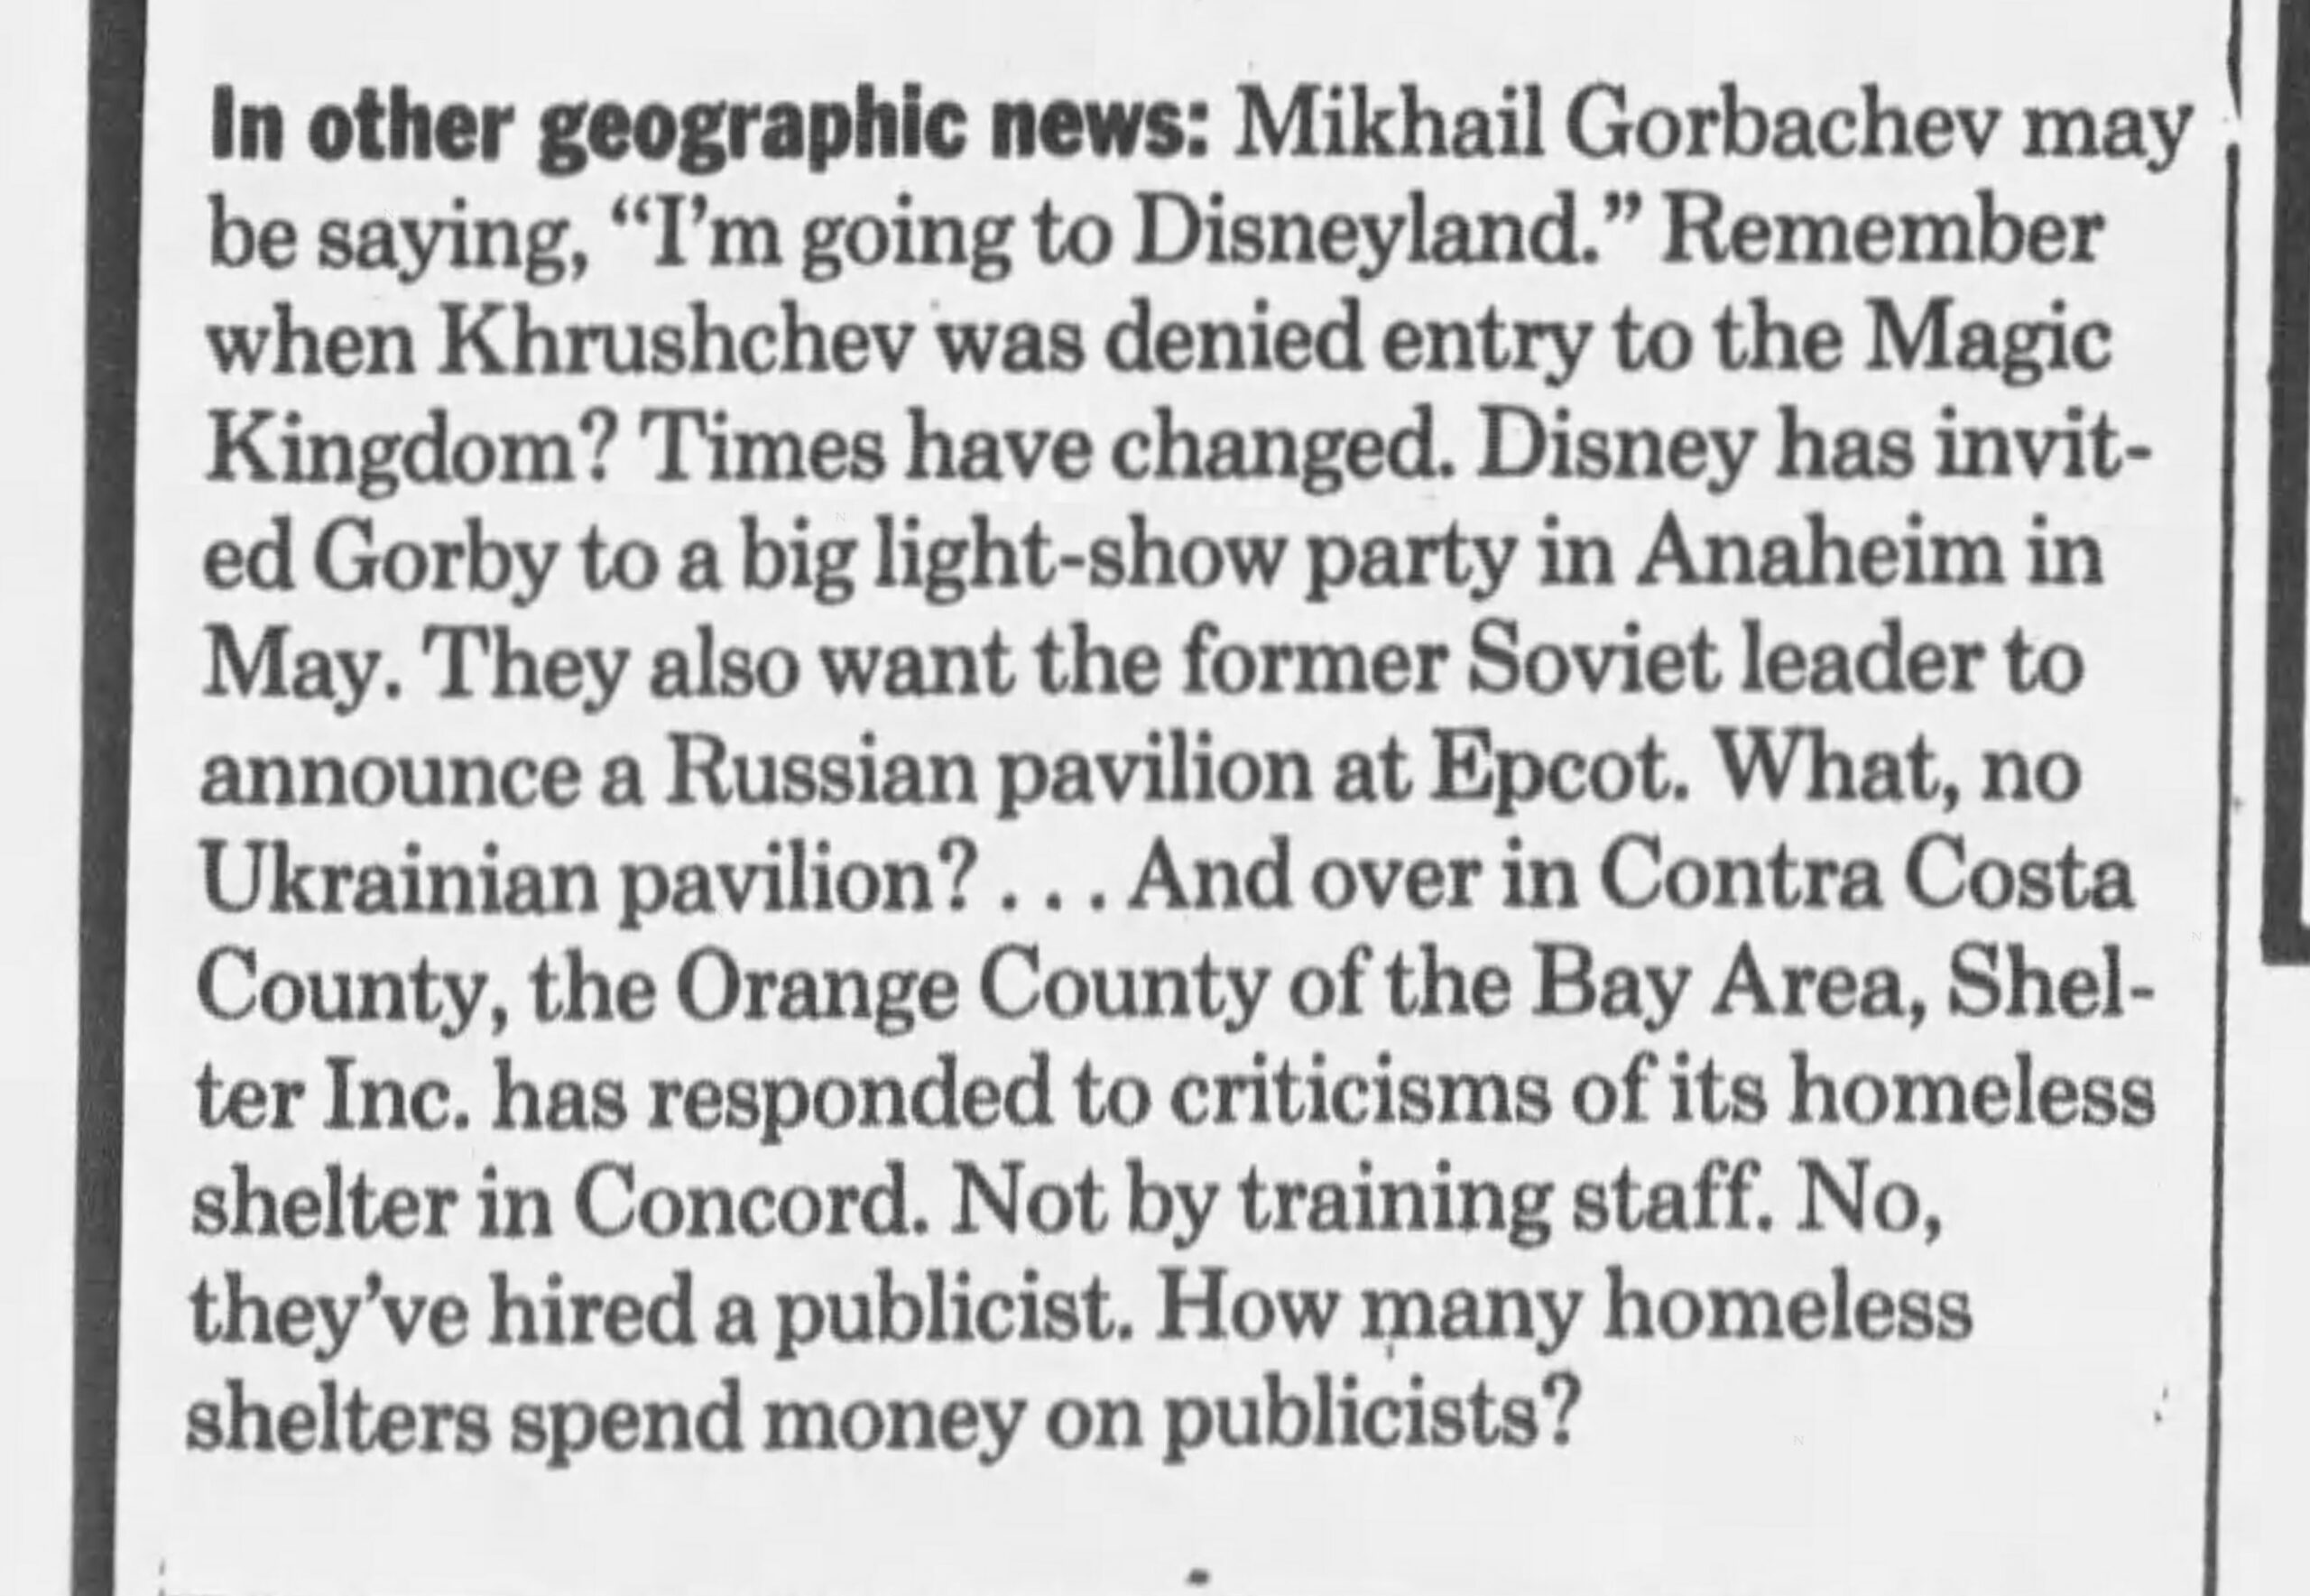 A Ukrainian pavilion in EPCOT for Ukraine was not announced by Walt Disney World Resort because the originating story was satire.